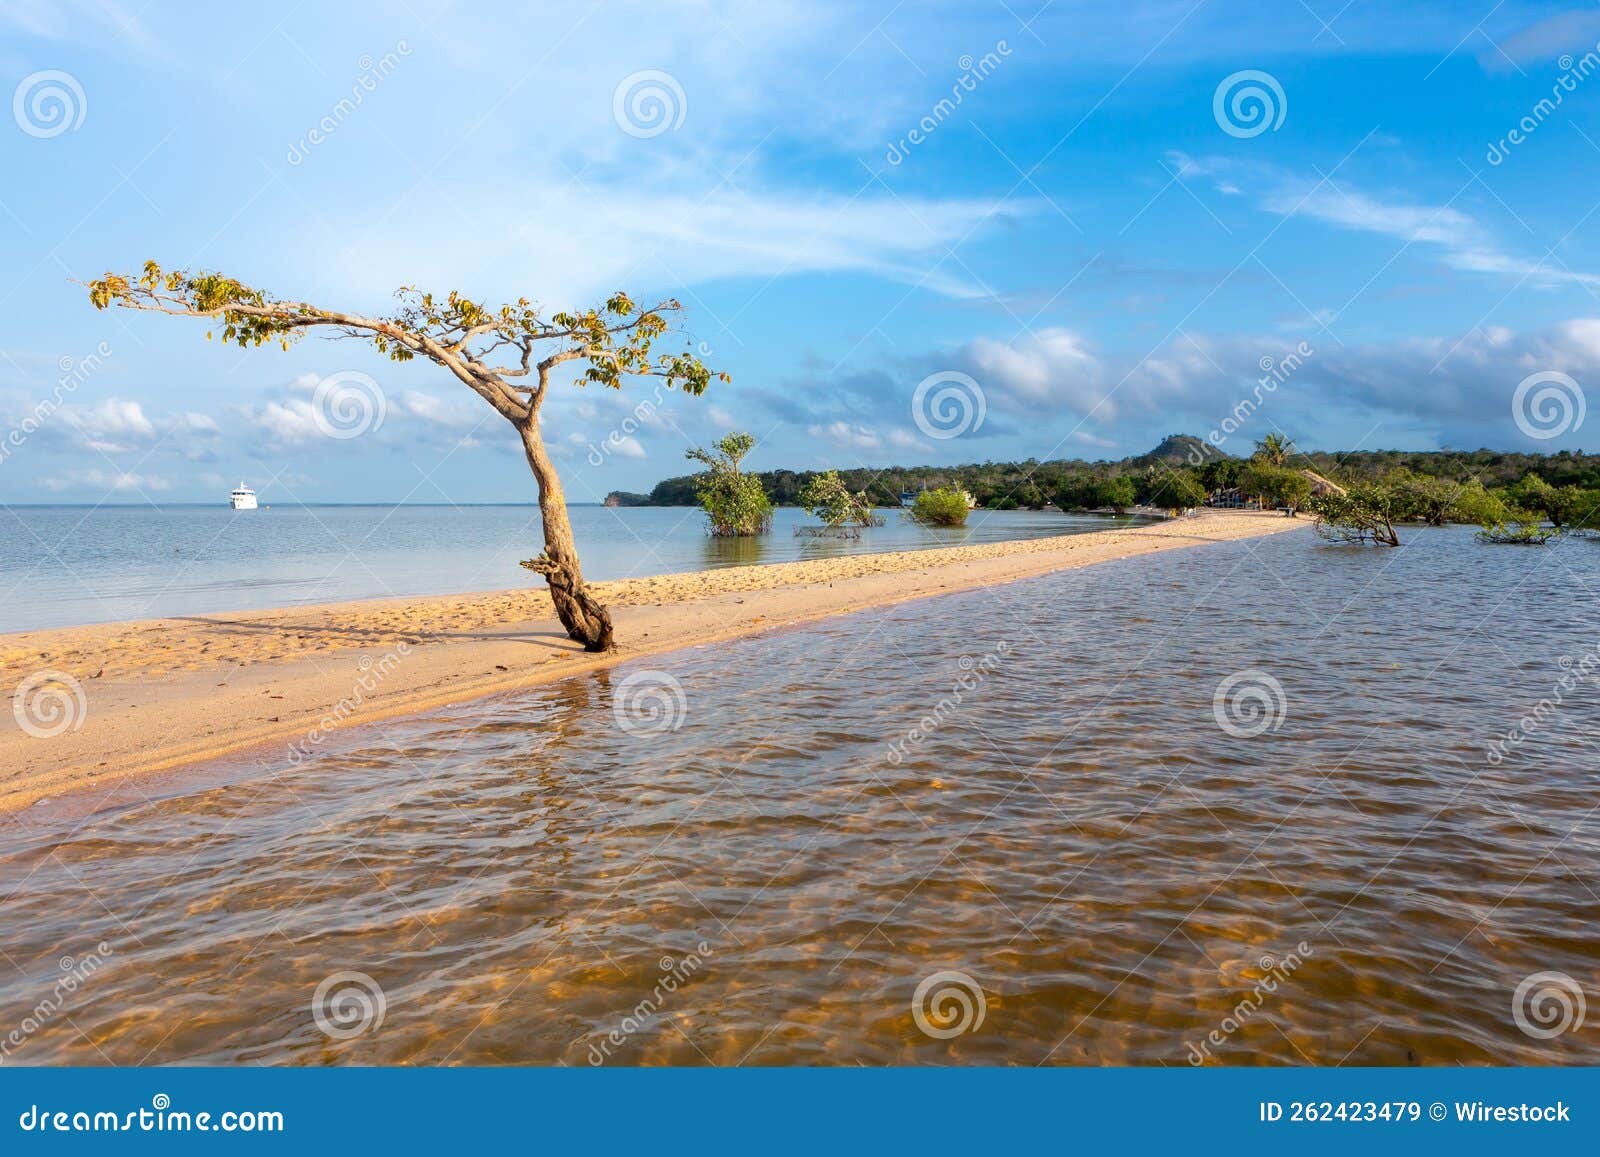 sandy beach by the tapajos river, in the amazon forest, brazil.